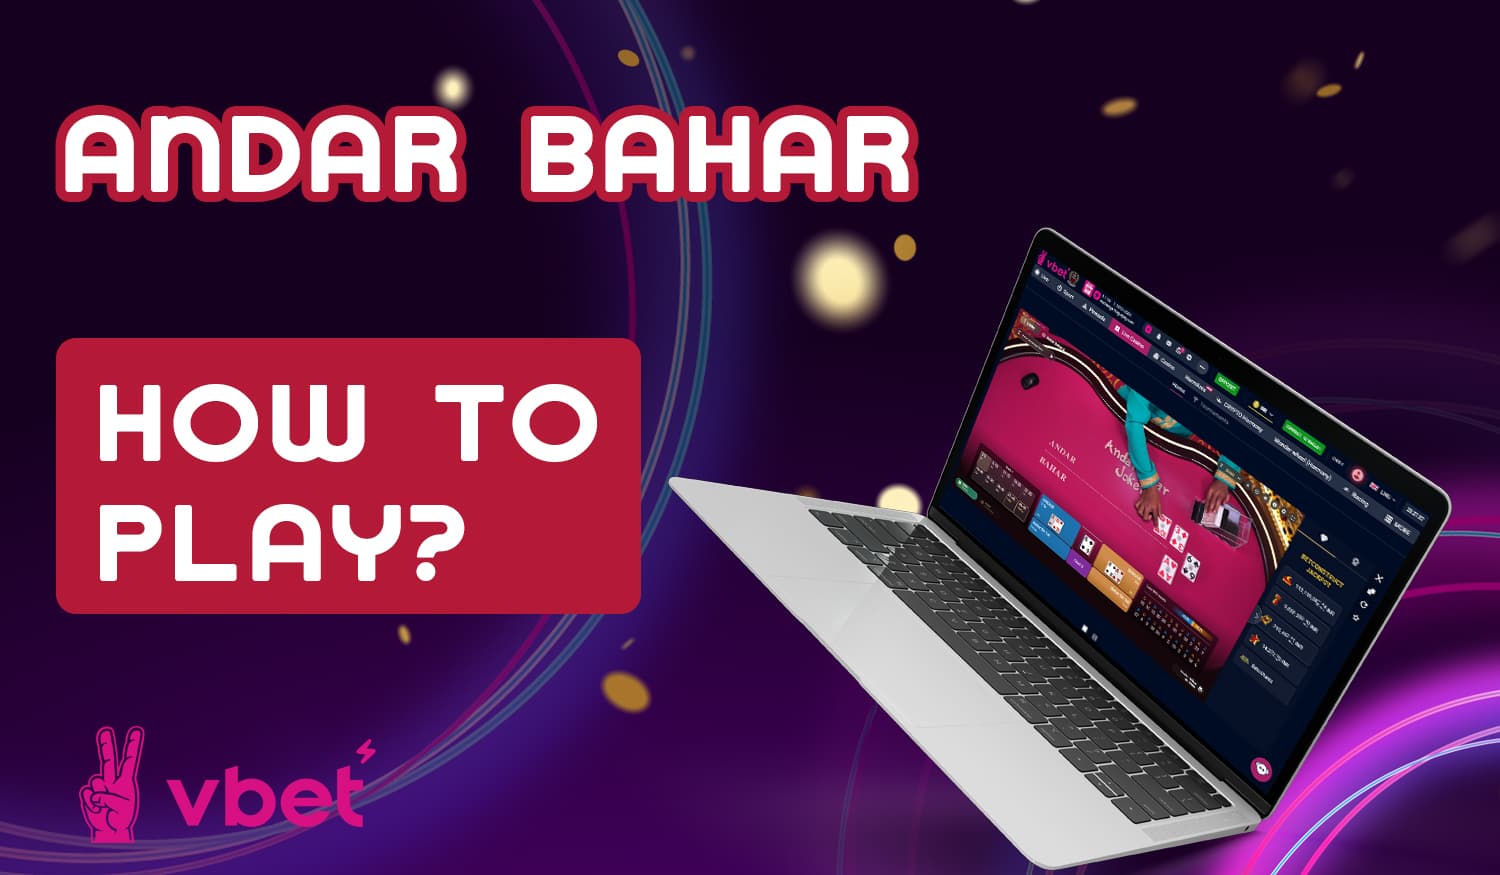 Instructions for beginners on Vbet10 online casino how to start playing Andar Bahar for real money